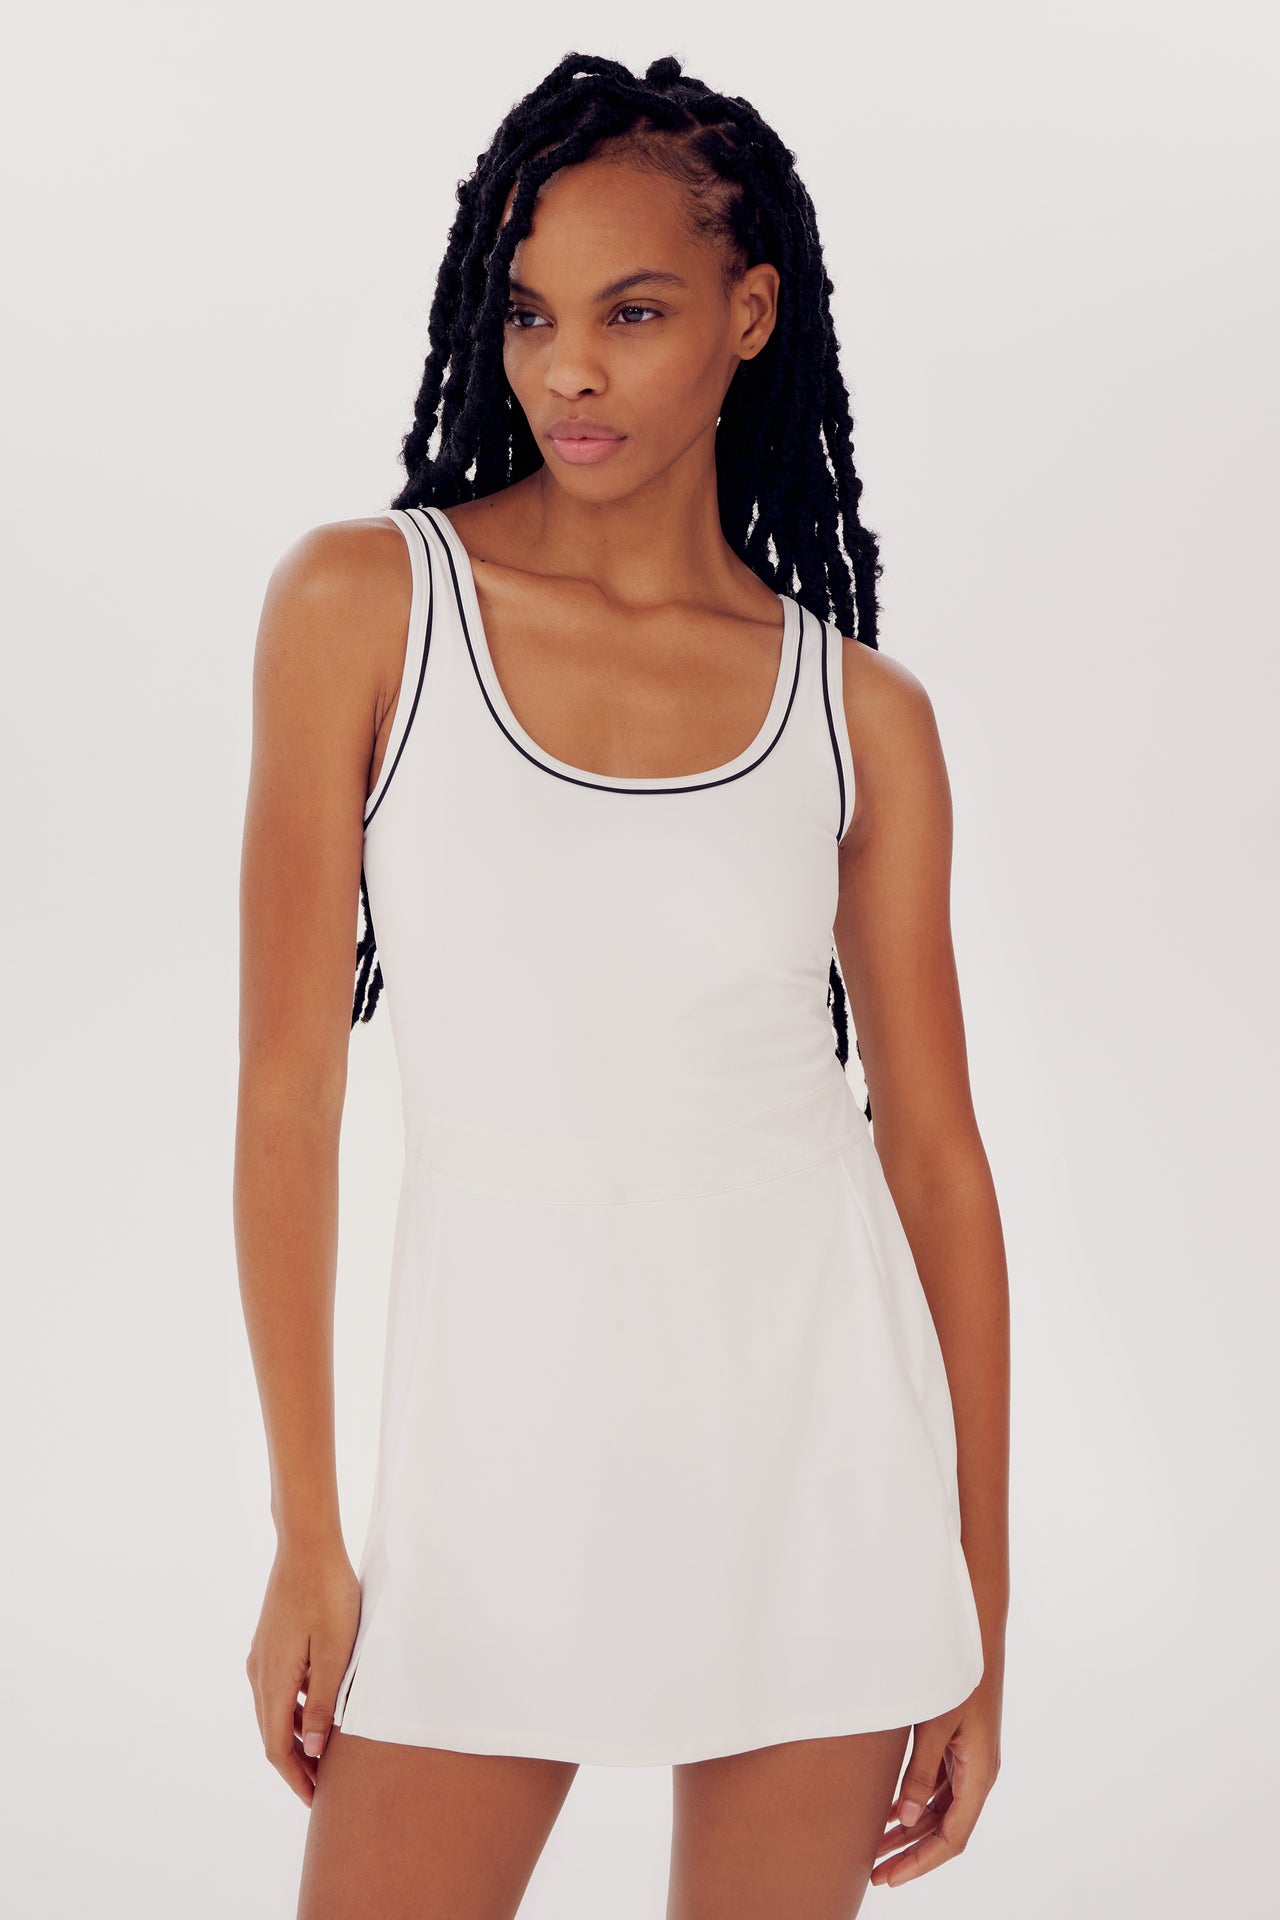 A person with long braided hair wears a SPLITS59 Martina Rigor Dress w/Piping - White, a white sleeveless design with black trim. They are standing against a plain, light-colored background.